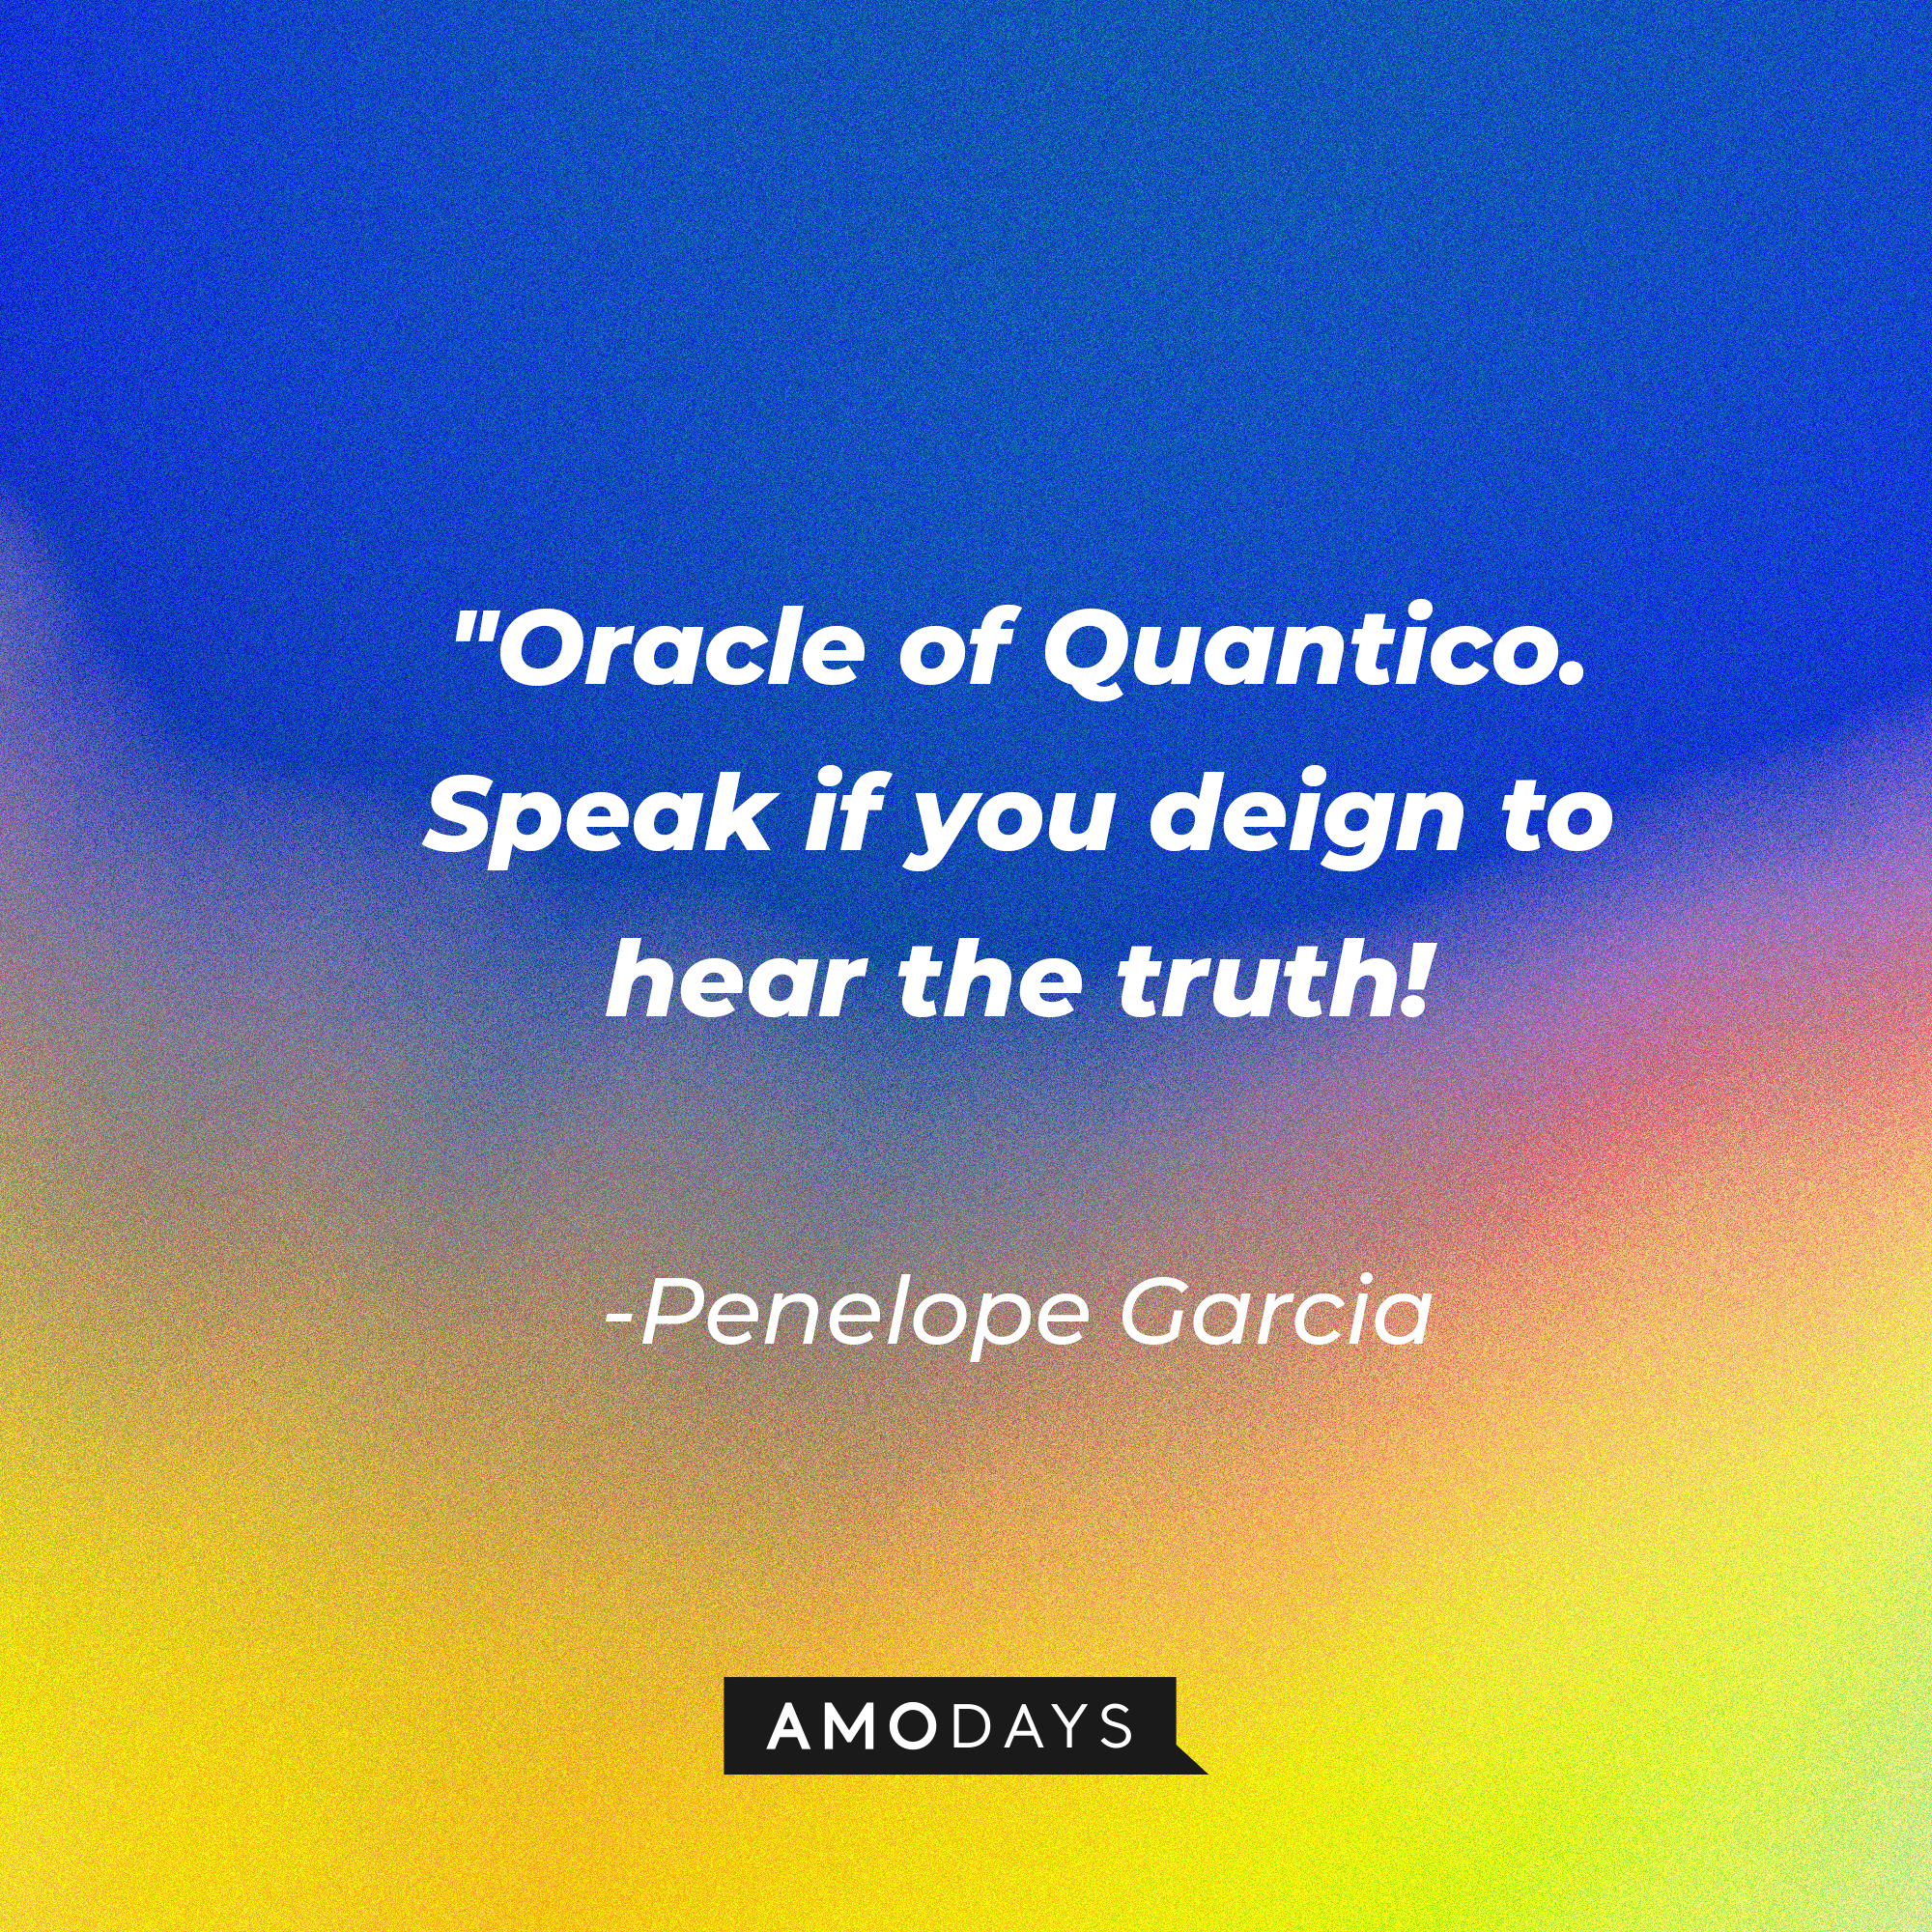 Penelope Garcia's quote: "Oracle of Quantico. Speak if you deign to hear the truth!" | Source: AmoDays